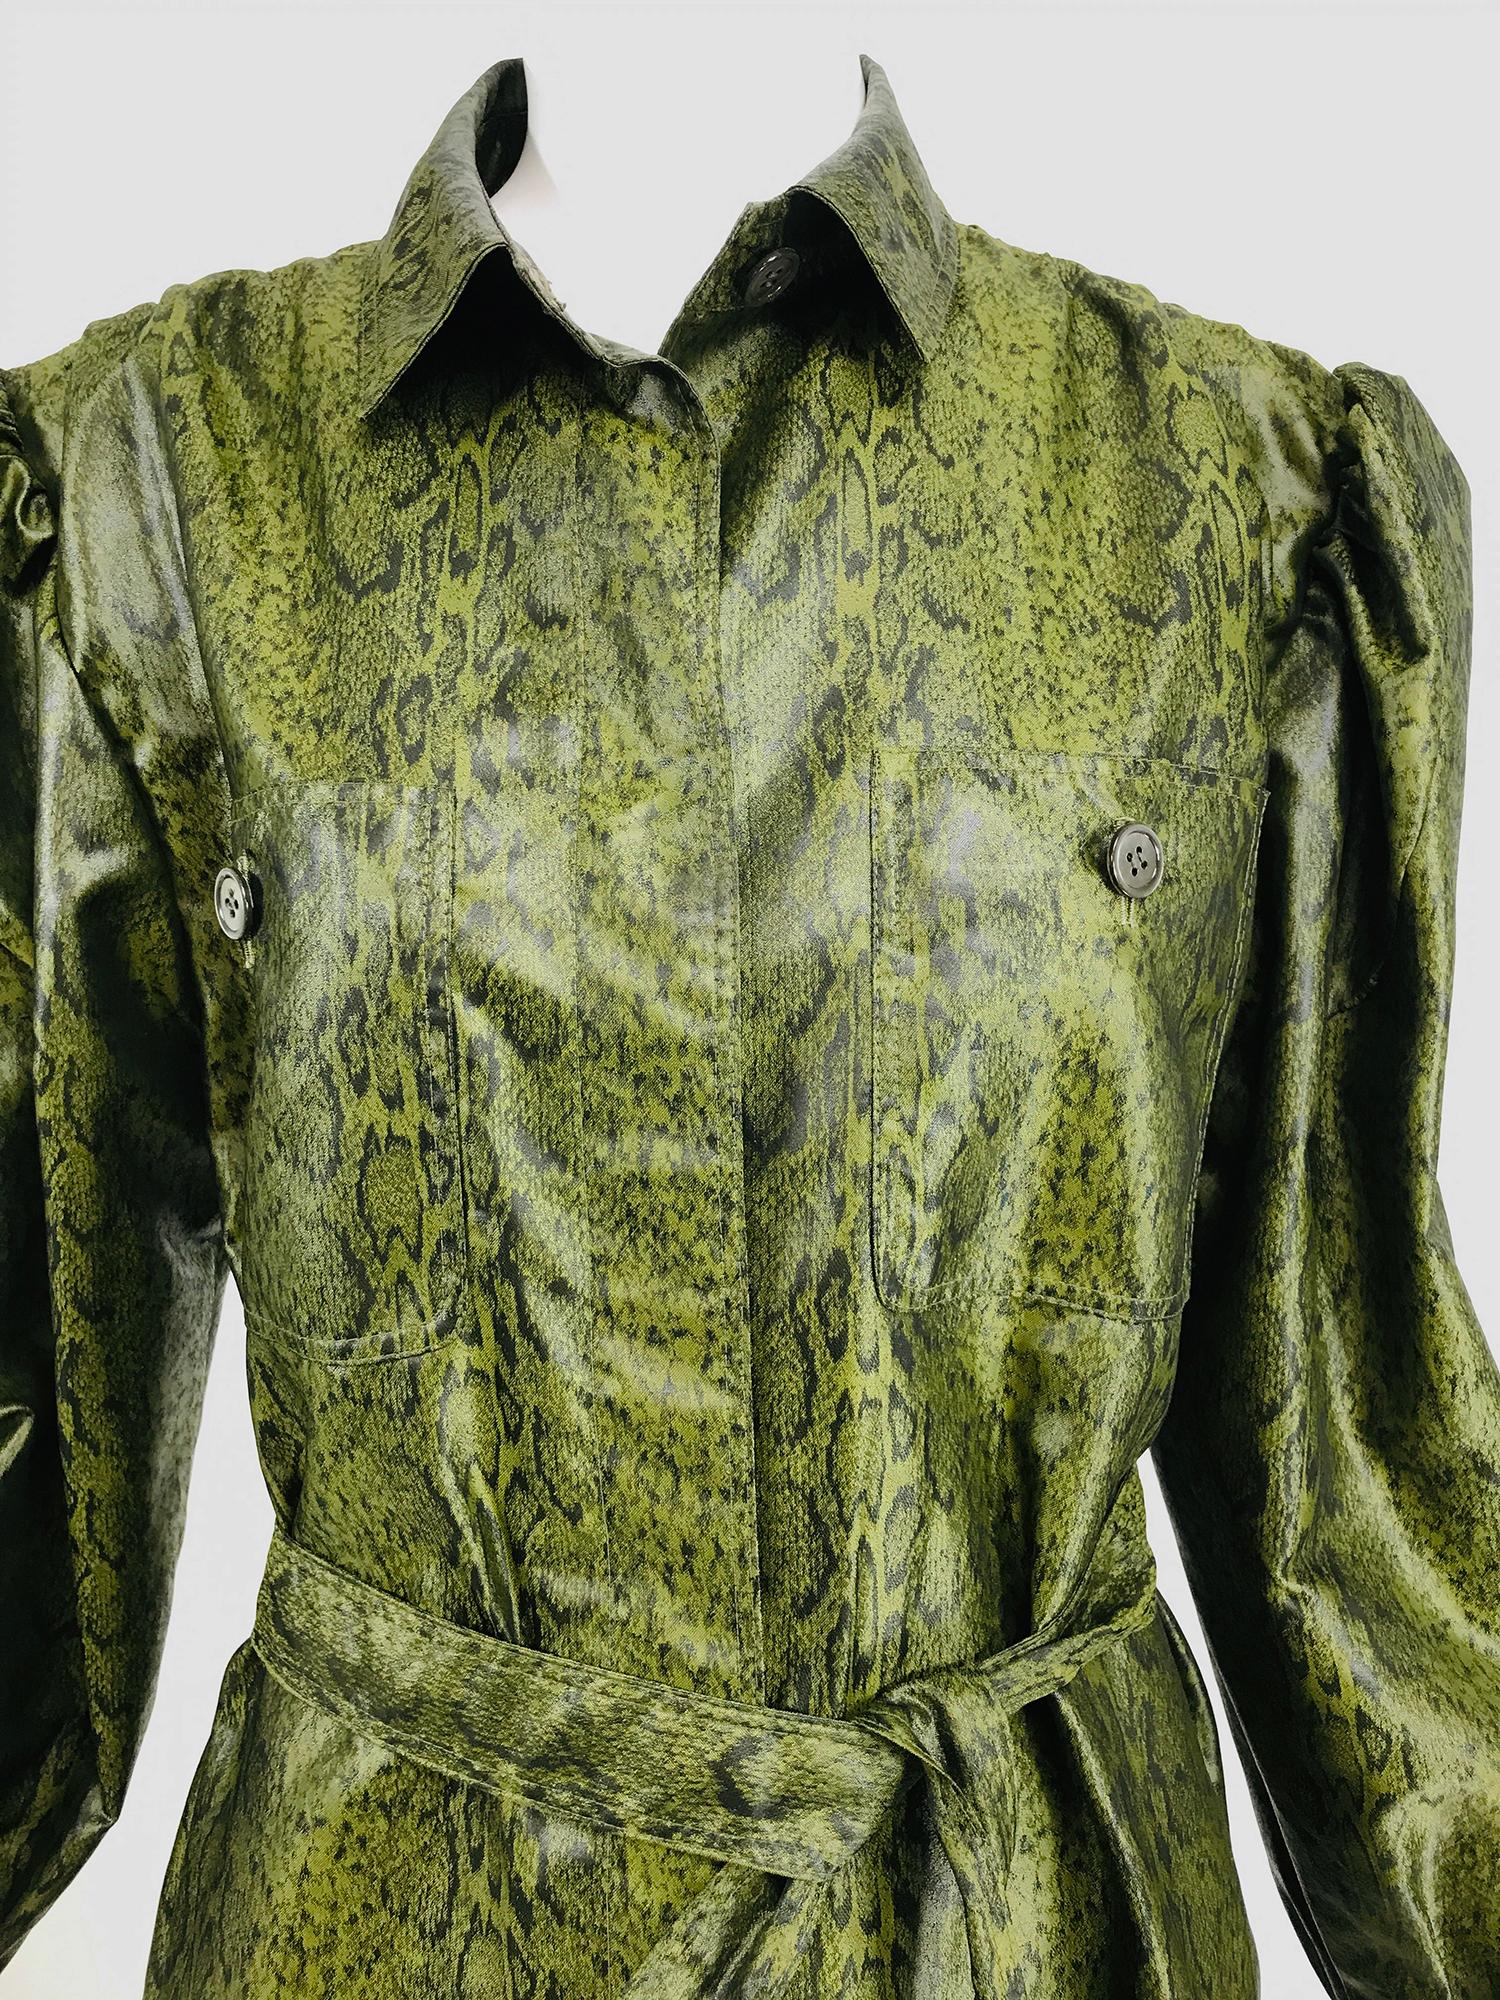 Adolfo green silk textured nylon snakeskin print print rain coat from the 1980s. Hidden button front placket closure coat, with narrow collar, shirred shoulder seams, peaked shoulder and full sleeves with gathered button cuffs. Breast patch pockets